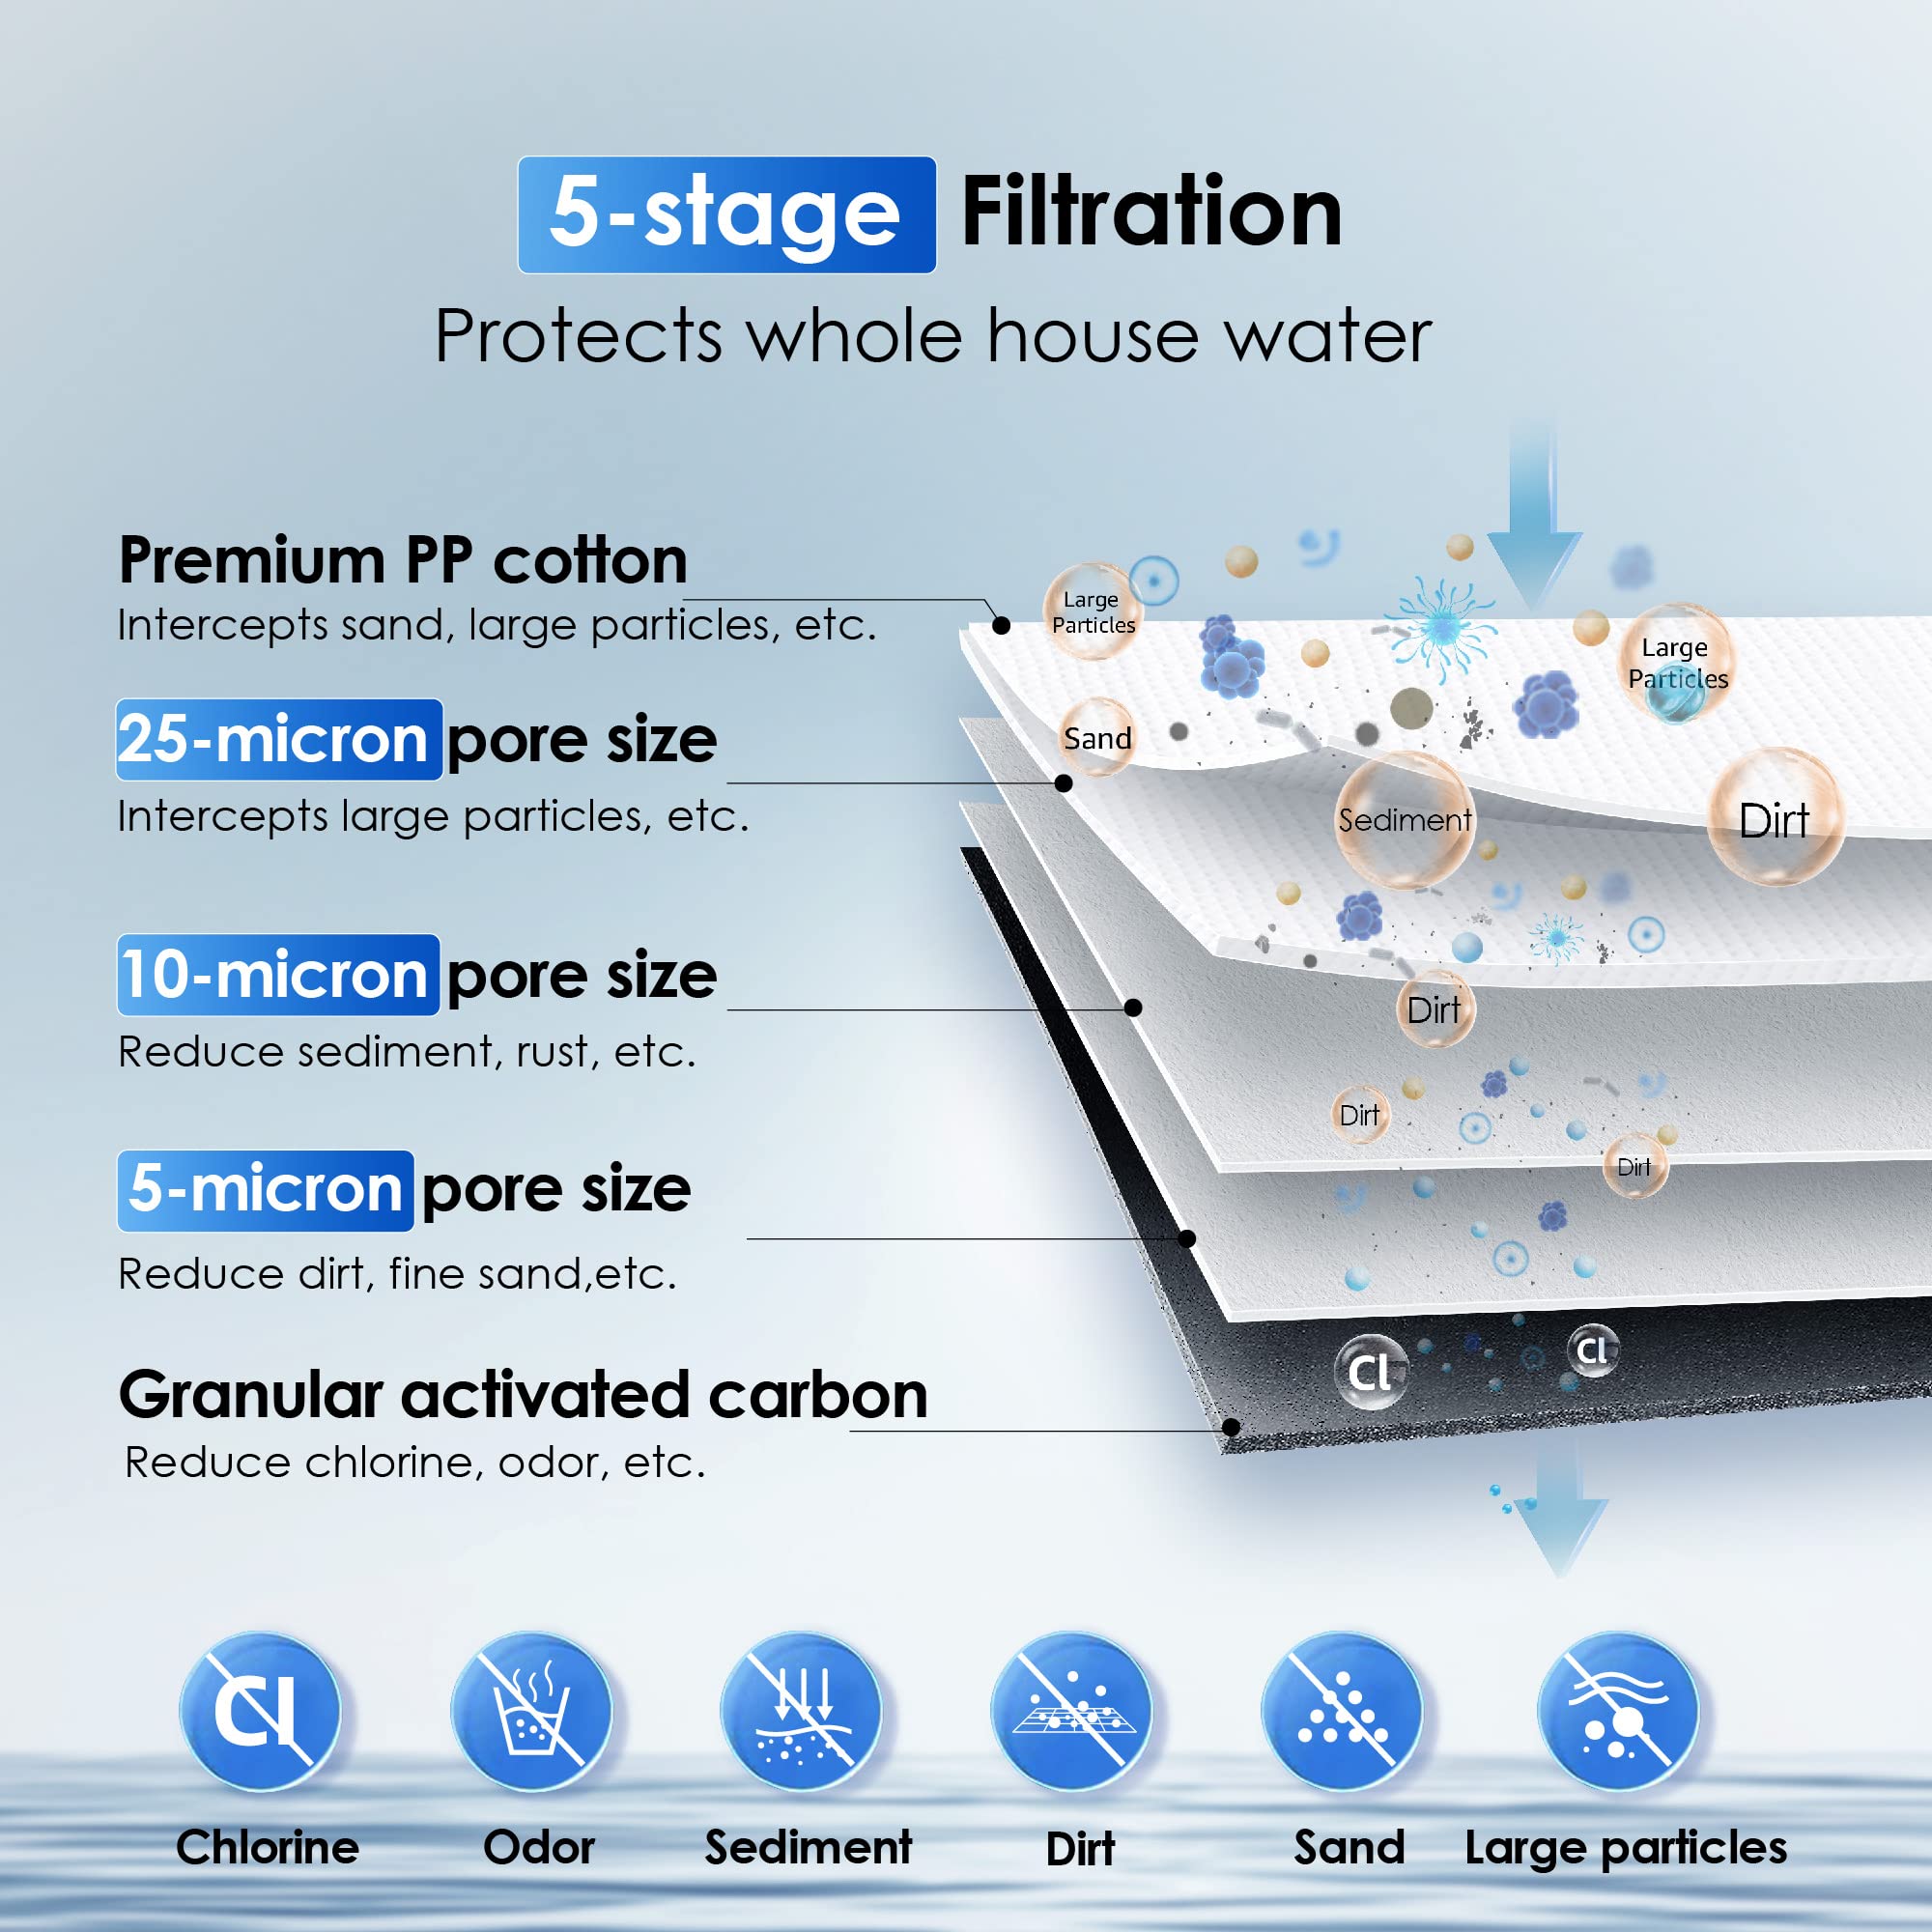 Waterdrop Whole House Water Filter System, with Carbon Filter and Sediment Filter, 5-Stage Filtration, Highly Reduce Lead, Chlorine, Odor and Taste, 2-Stage 5 Micron WD-WHF21-PG, 1" Inlet/Outlet